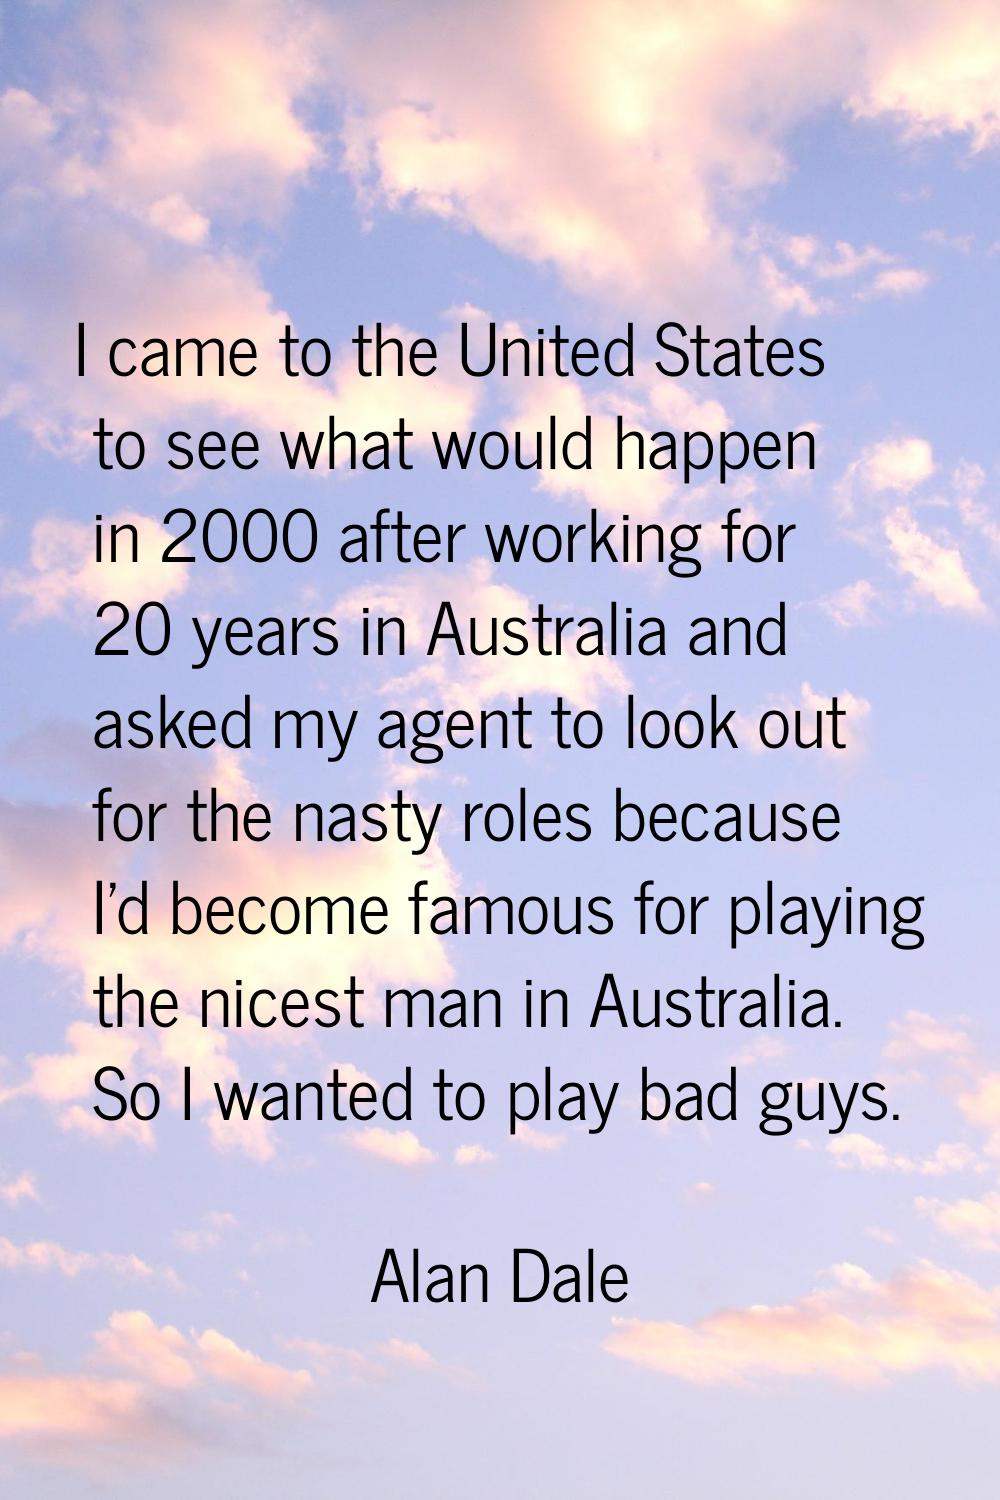 I came to the United States to see what would happen in 2000 after working for 20 years in Australi